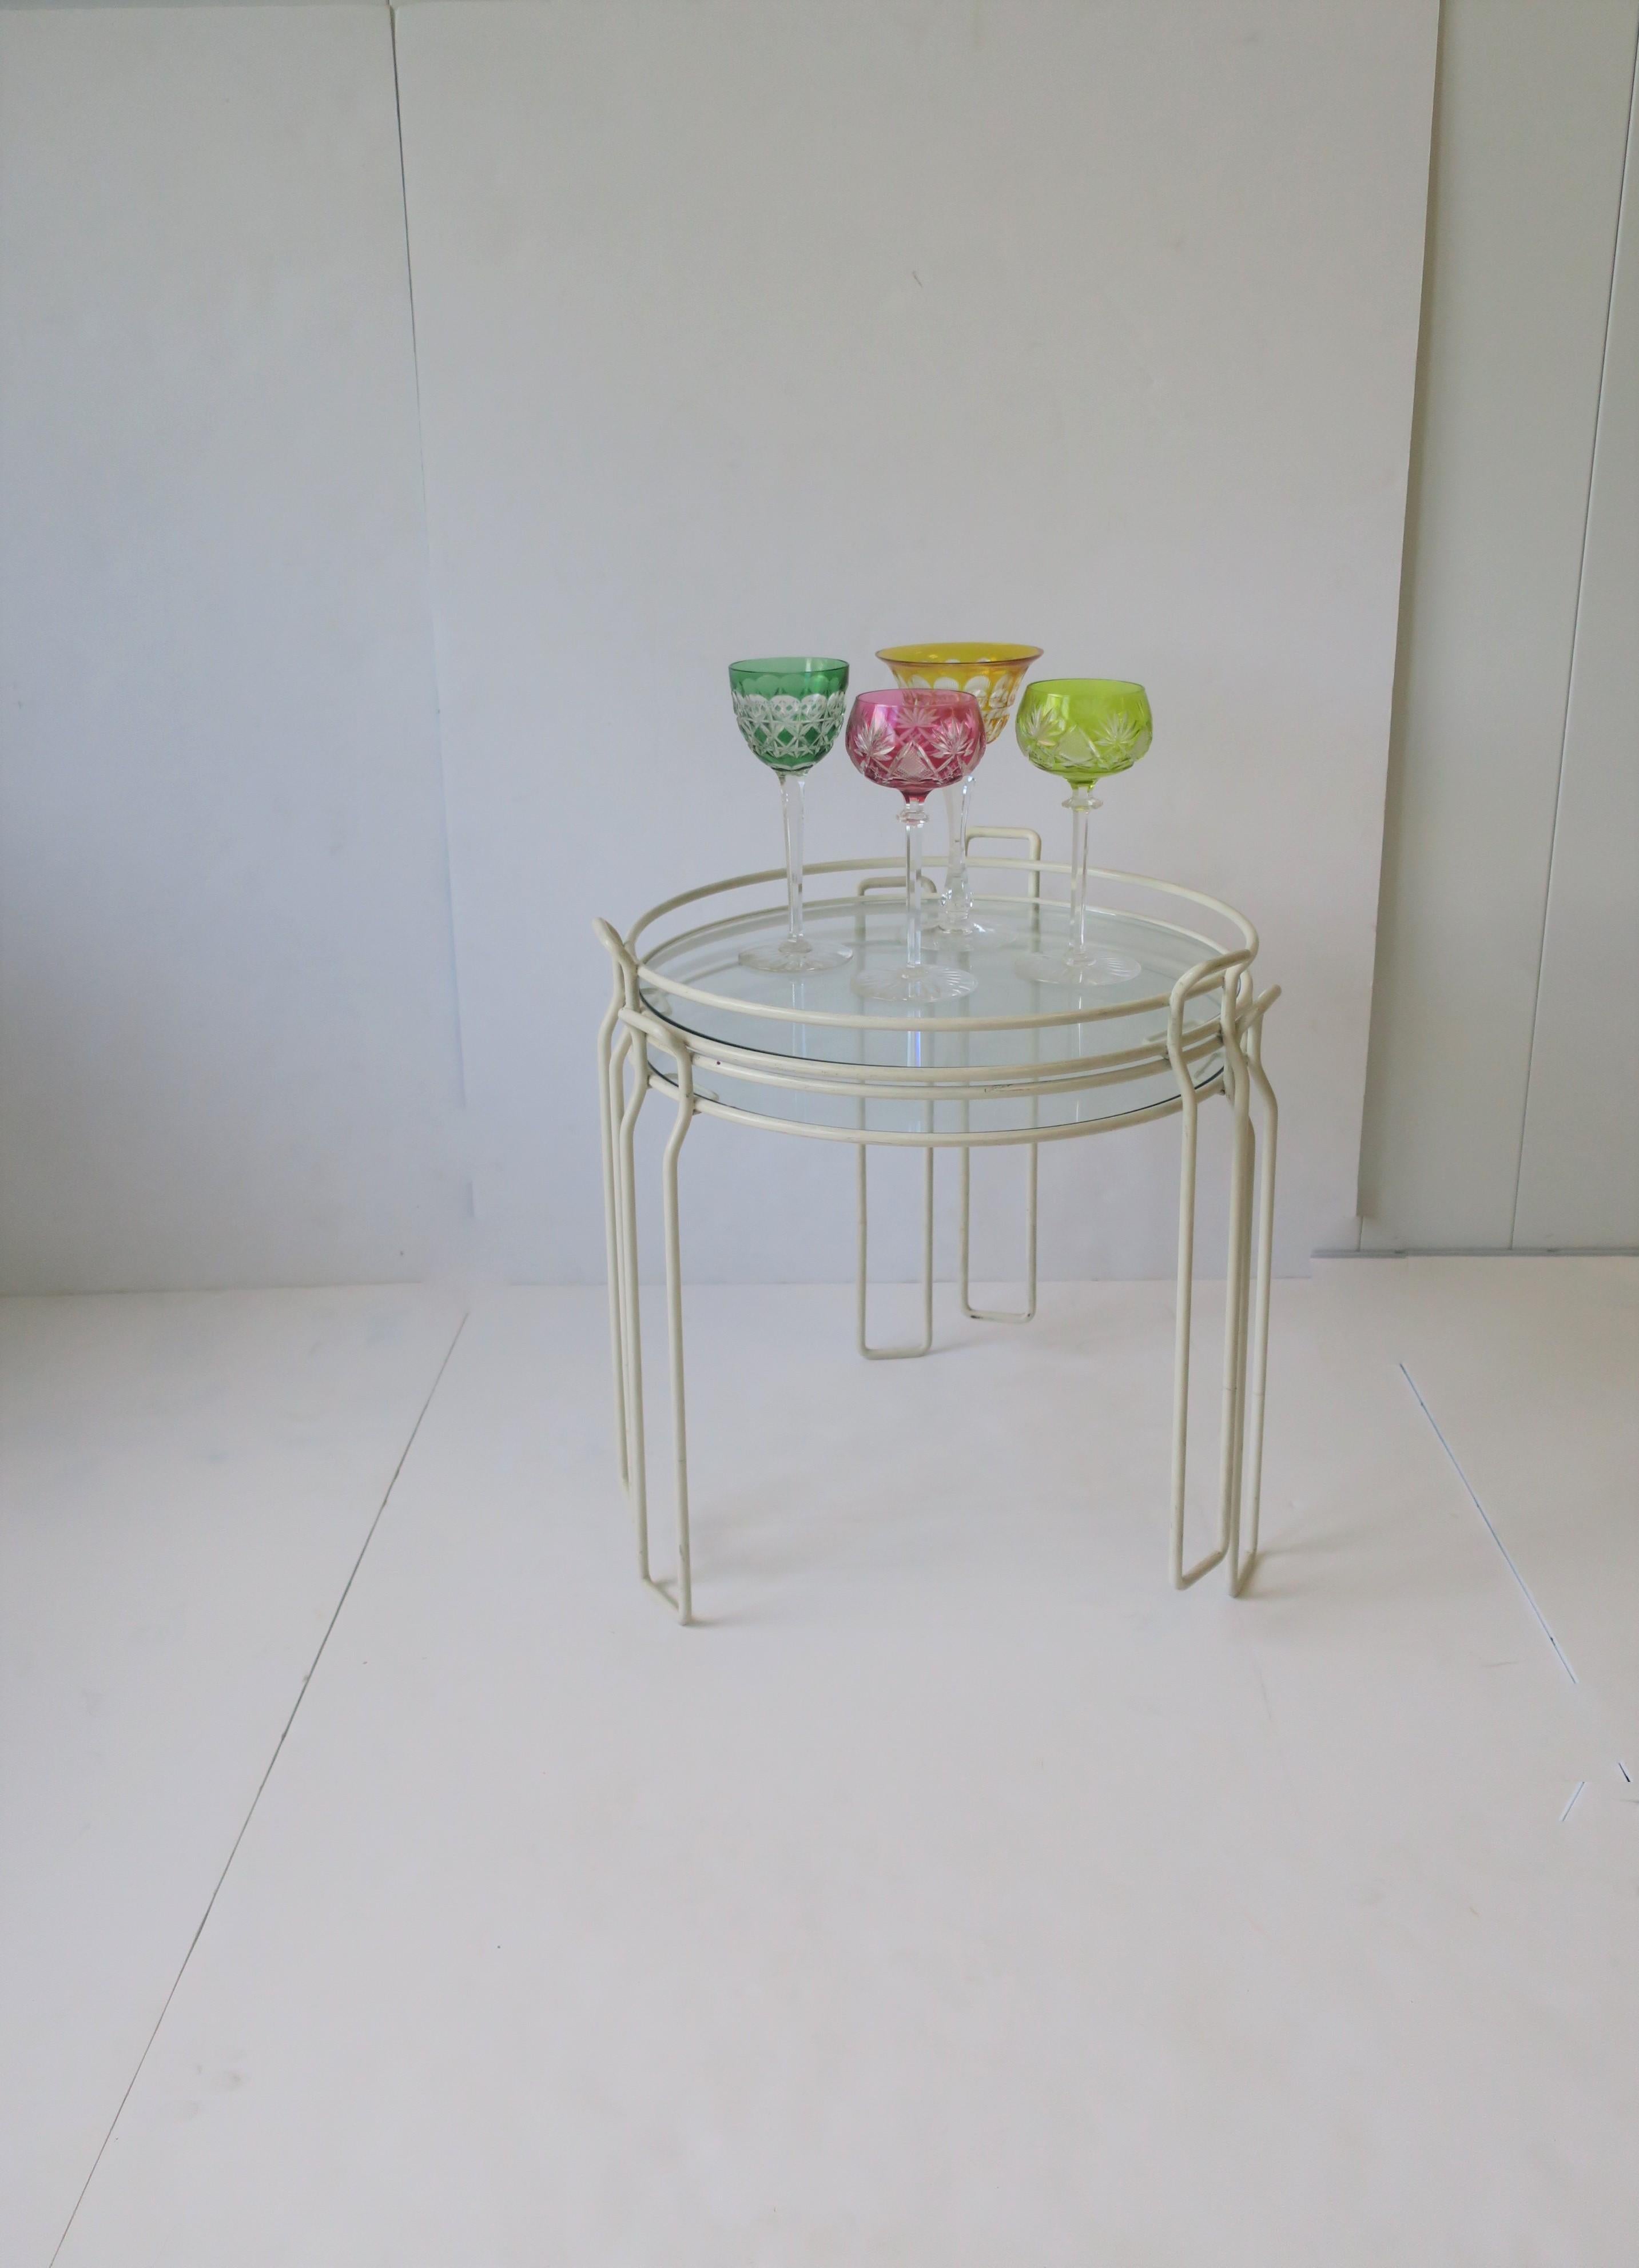 Midcentury Modern White Side Drinks Nesting or Stacking Tables, Pair, 1960s For Sale 3